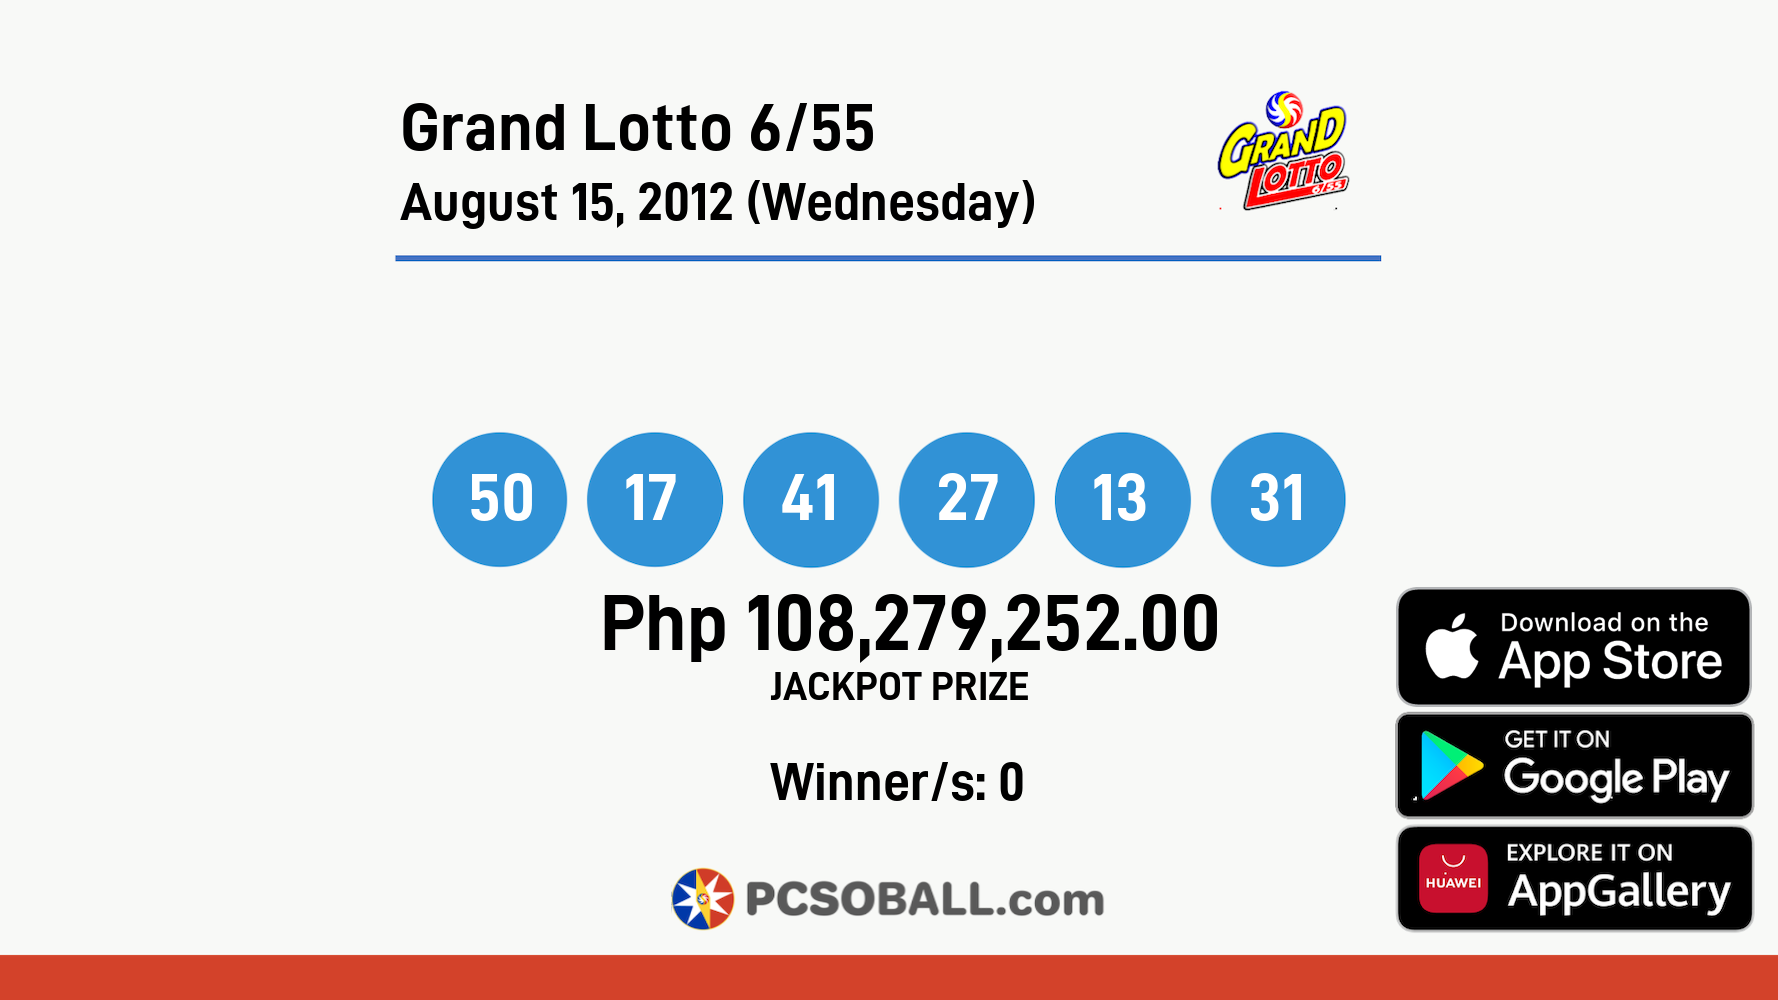 Grand Lotto 6/55 August 15, 2012 (Wednesday) Result